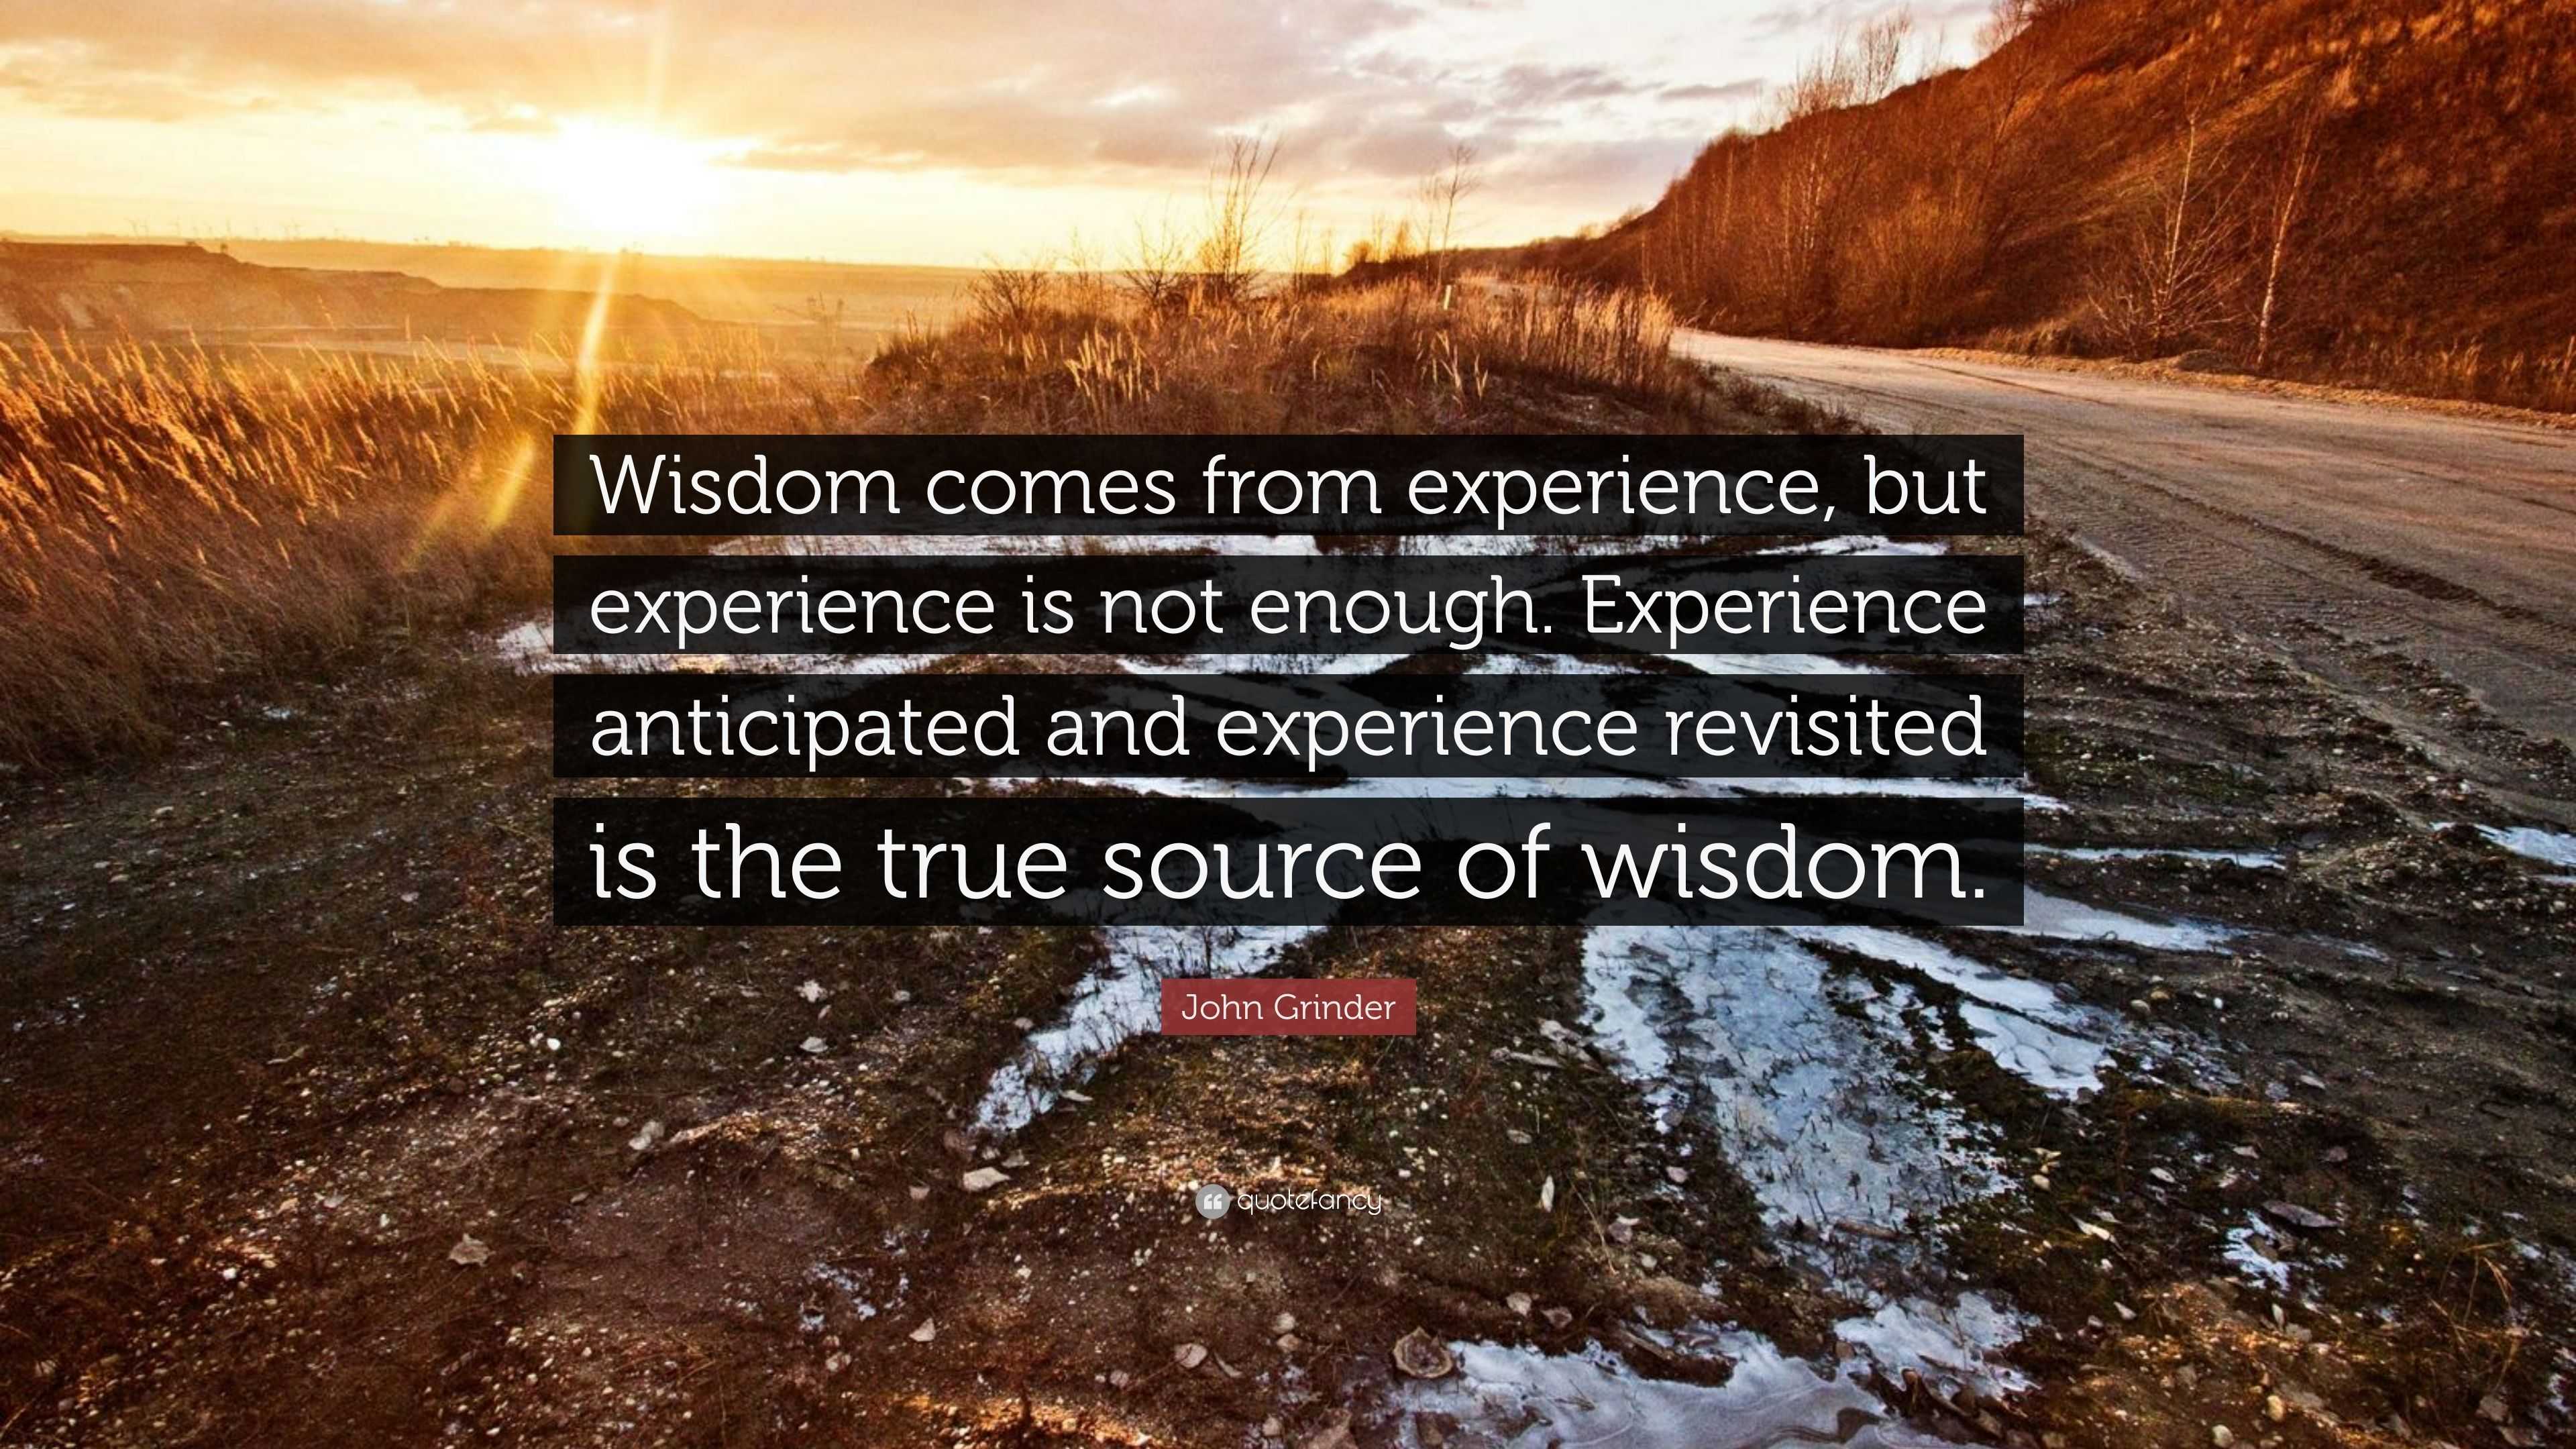 essay on true wisdom comes from experience